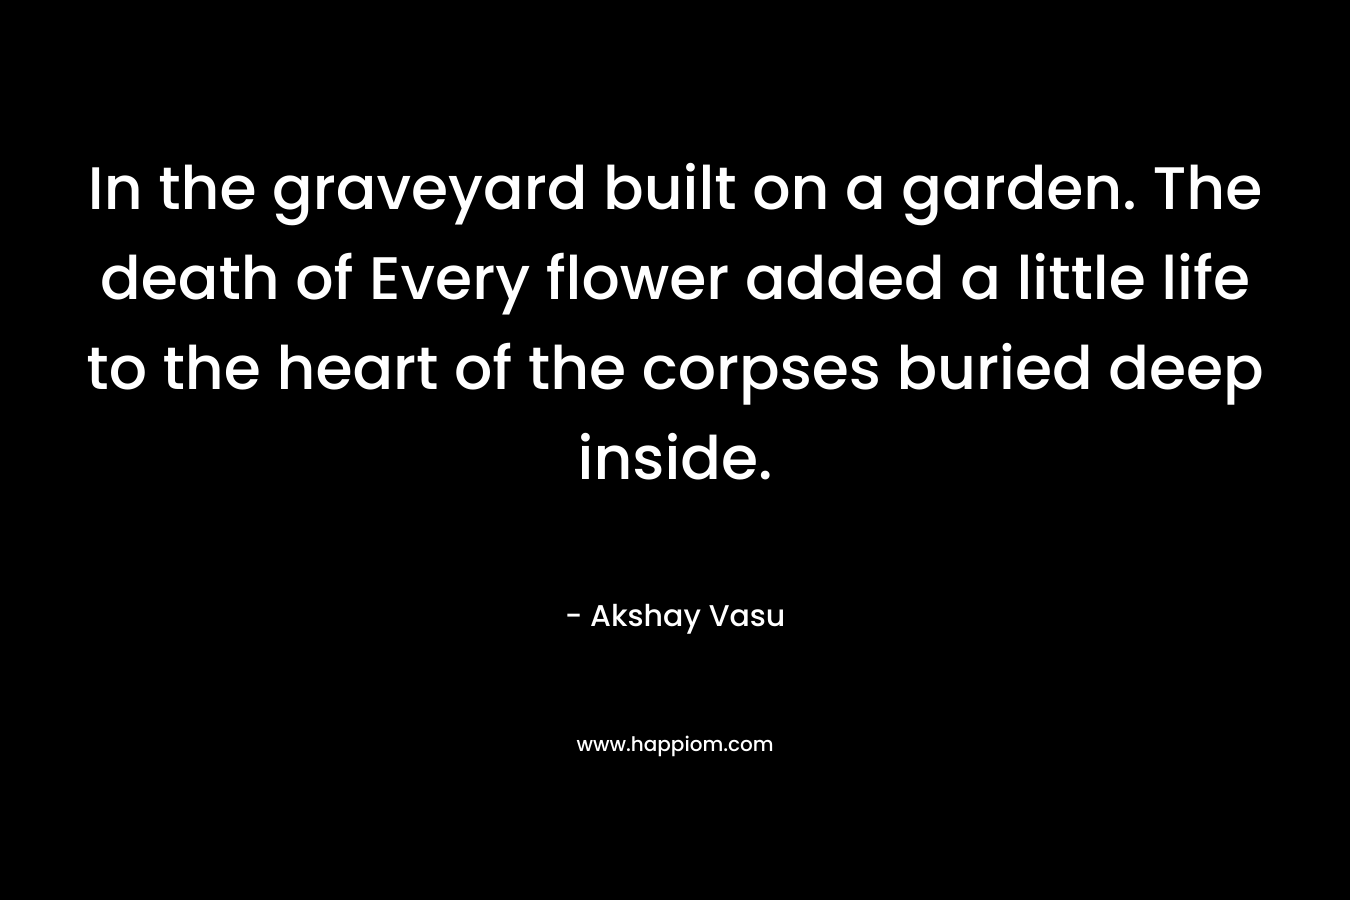 In the graveyard built on a garden. The death of Every flower added a little life to the heart of the corpses buried deep inside. – Akshay Vasu